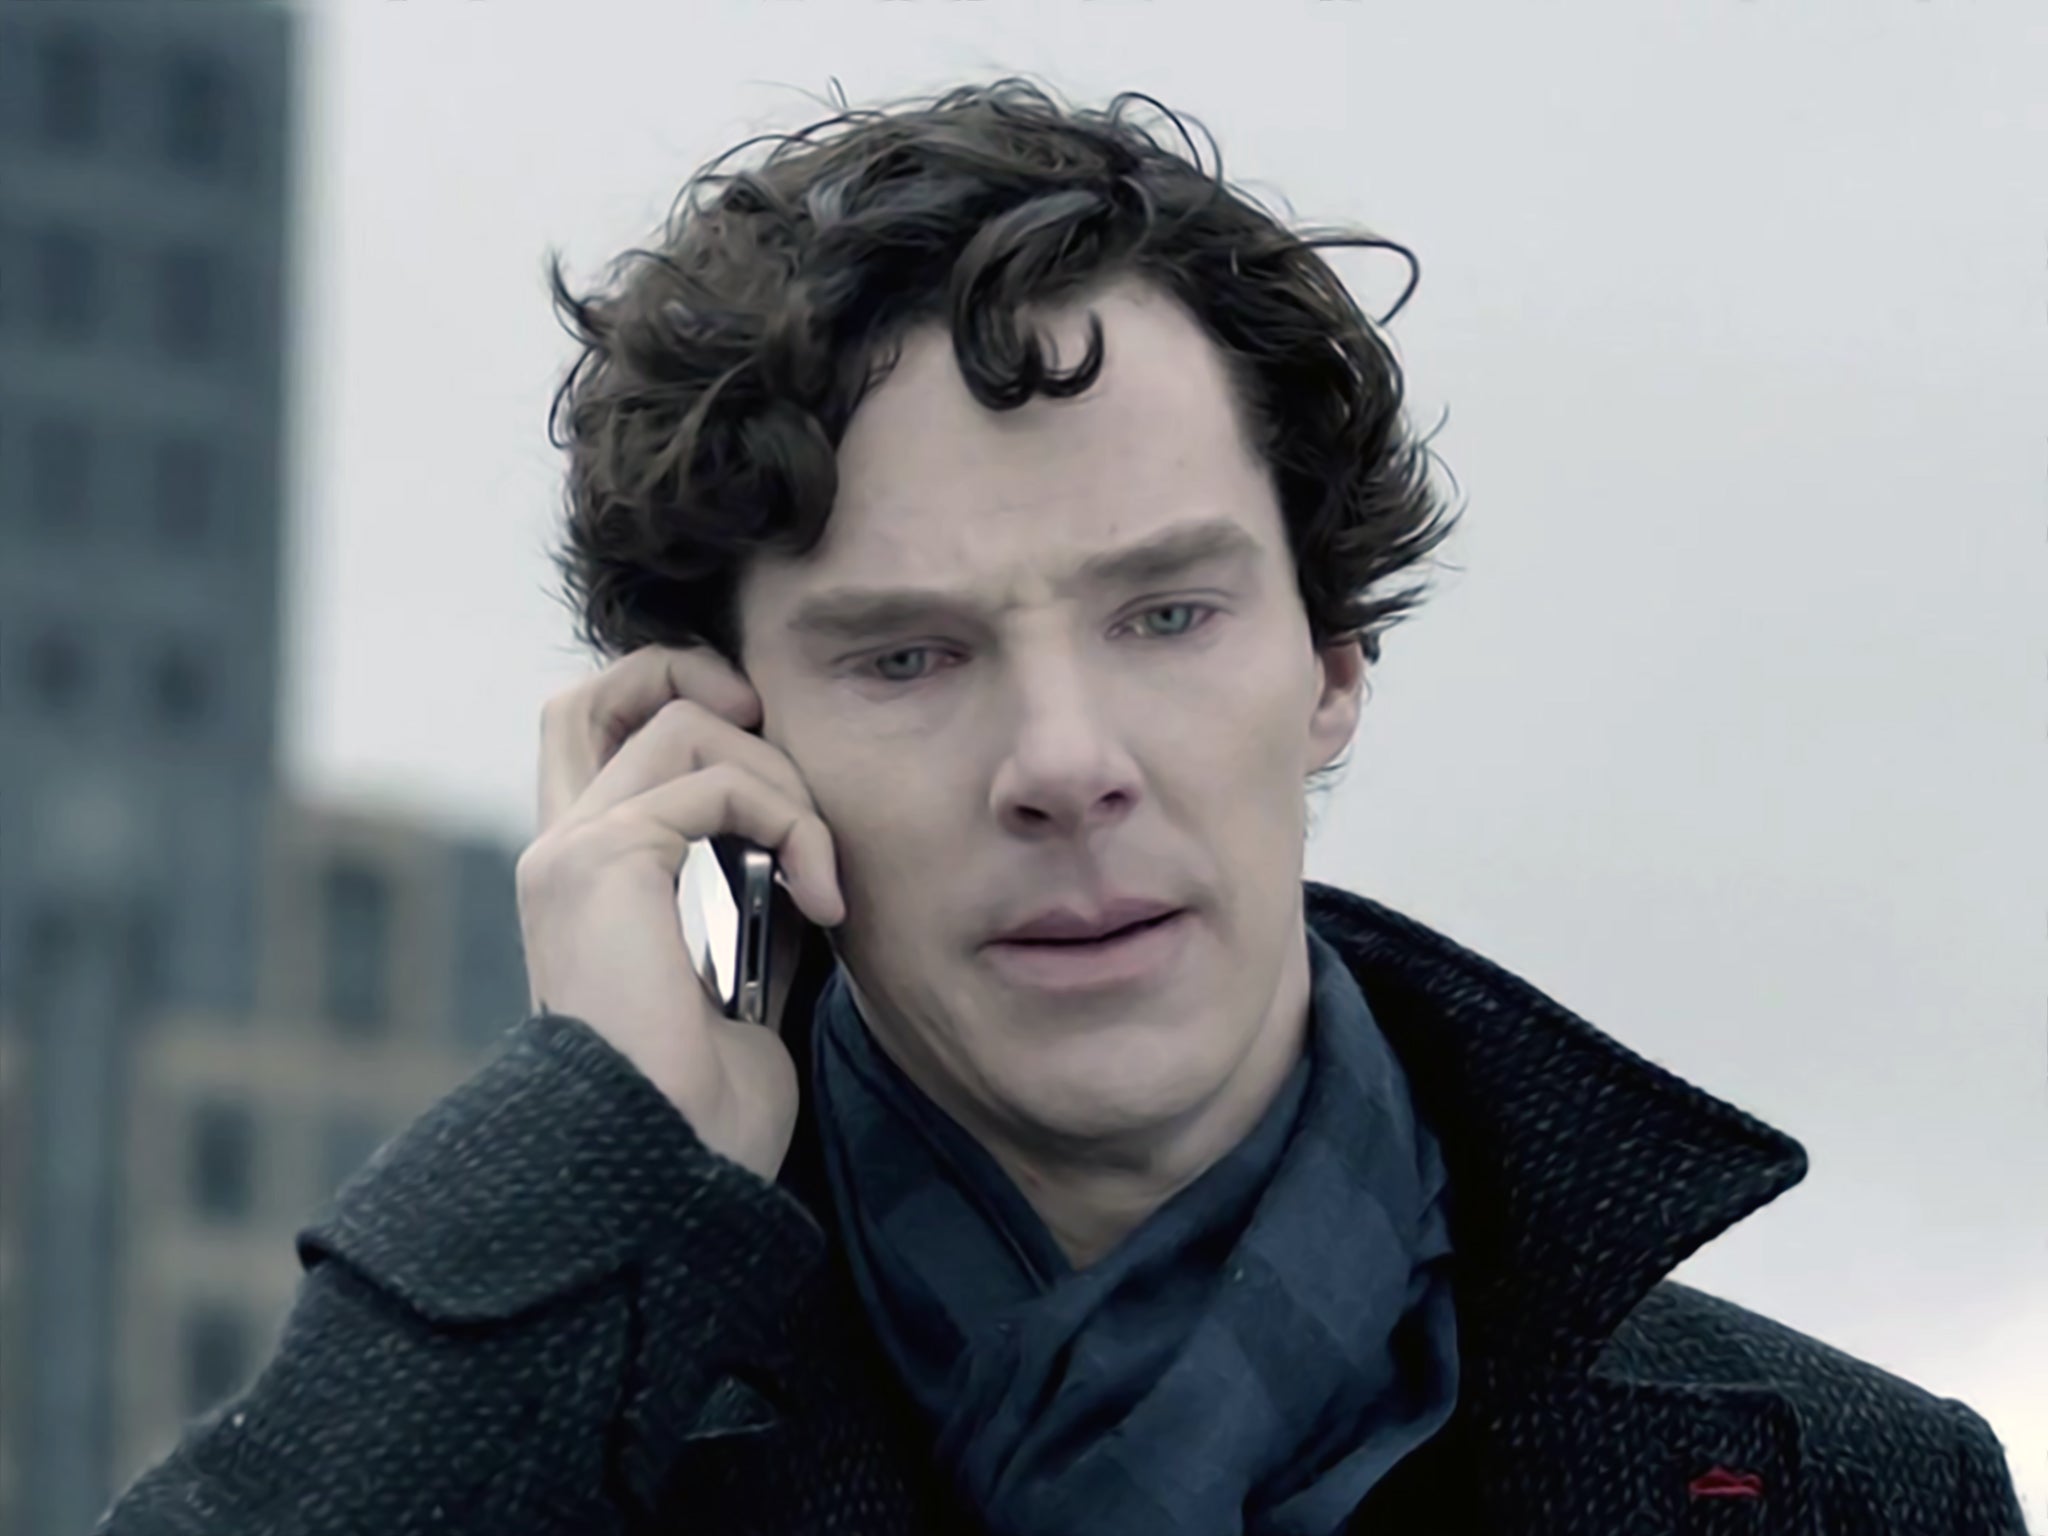 Last call: Benedict Cumberbatch pre-rooftop swan dive in ‘The Reichenbach Fall'